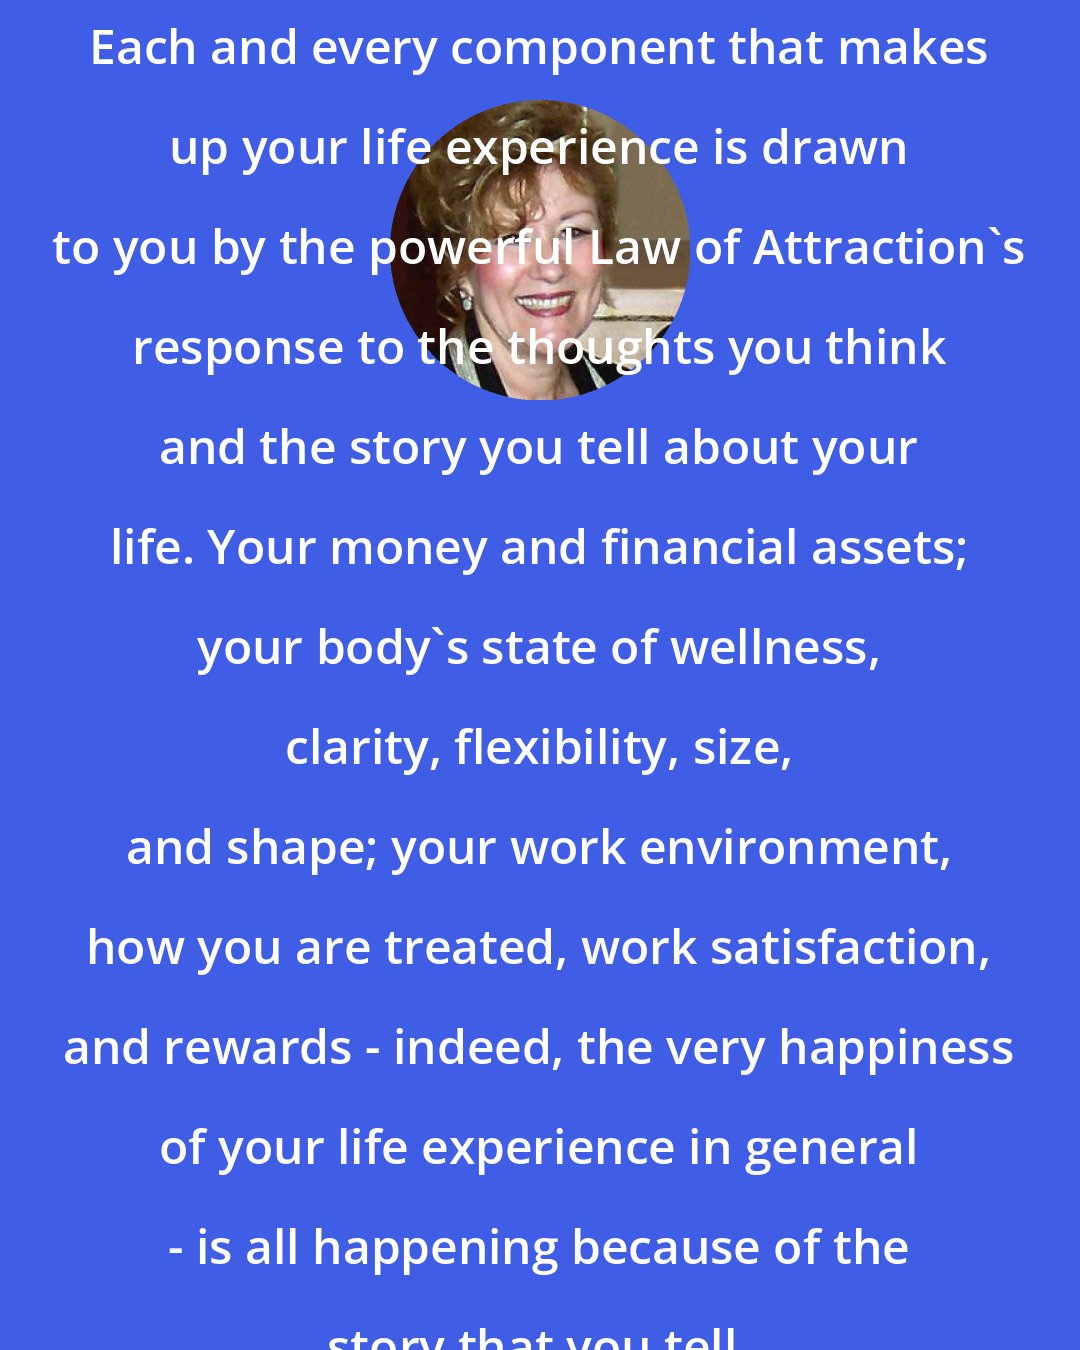 Esther Hicks: Each and every component that makes up your life experience is drawn to you by the powerful Law of Attraction's response to the thoughts you think and the story you tell about your life. Your money and financial assets; your body's state of wellness, clarity, flexibility, size, and shape; your work environment, how you are treated, work satisfaction, and rewards - indeed, the very happiness of your life experience in general - is all happening because of the story that you tell.